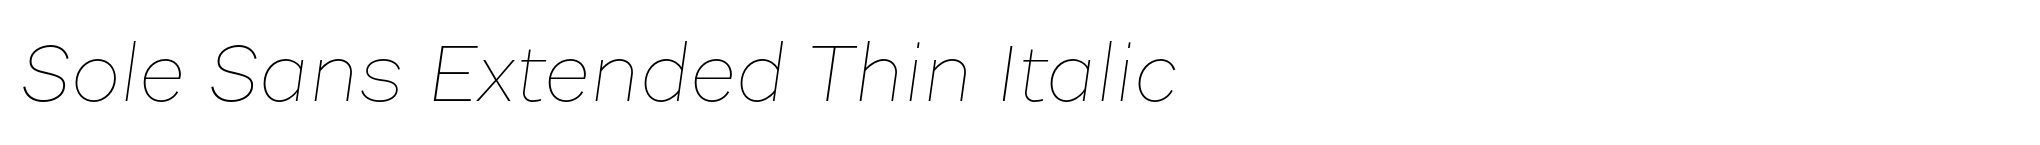 Sole Sans Extended Thin Italic image